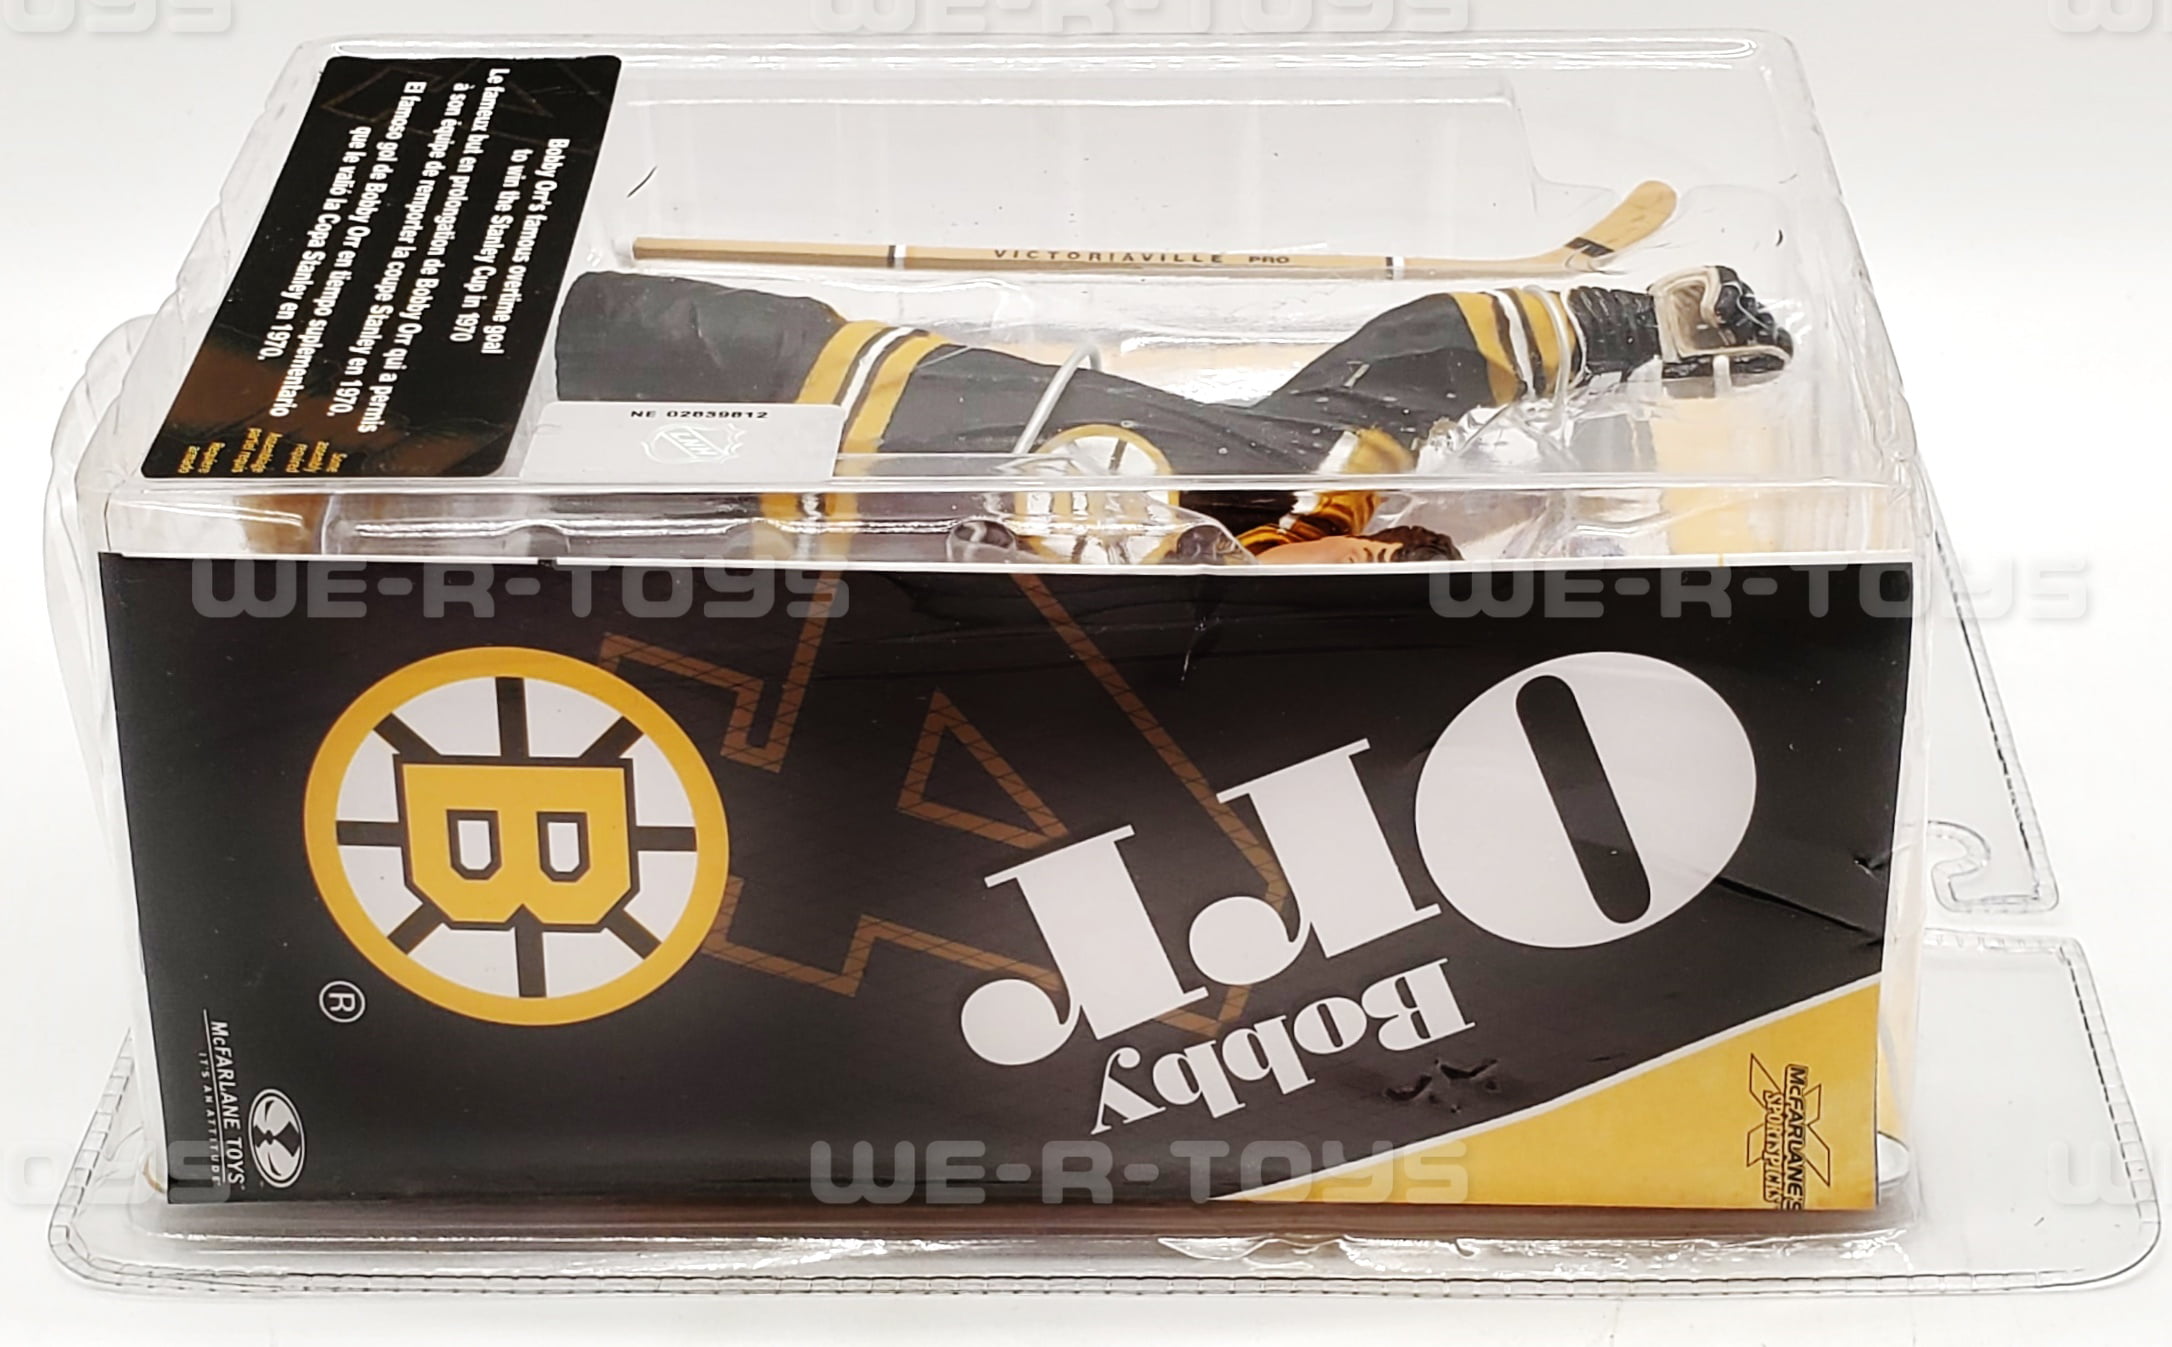 NHL Legends Series 3 Figure Bobby Orr Black and Yellow Jersey